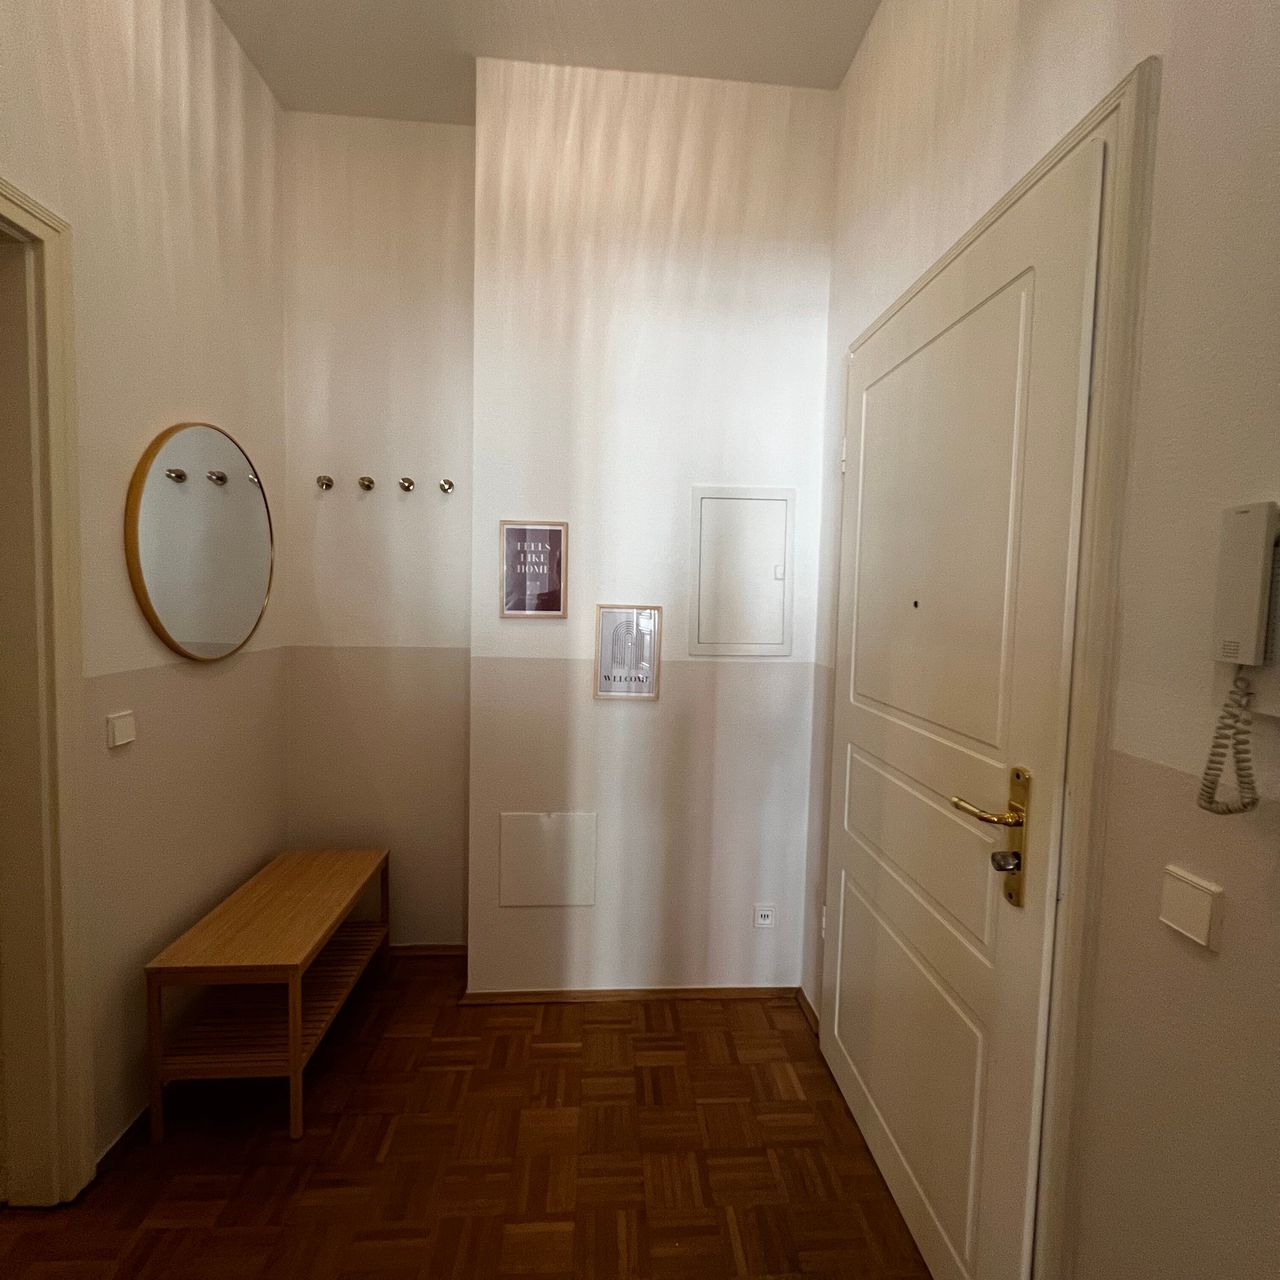 STUNNING 2 ROOM APARTMENT IN CENTRAL LOCATION LEIPZIG